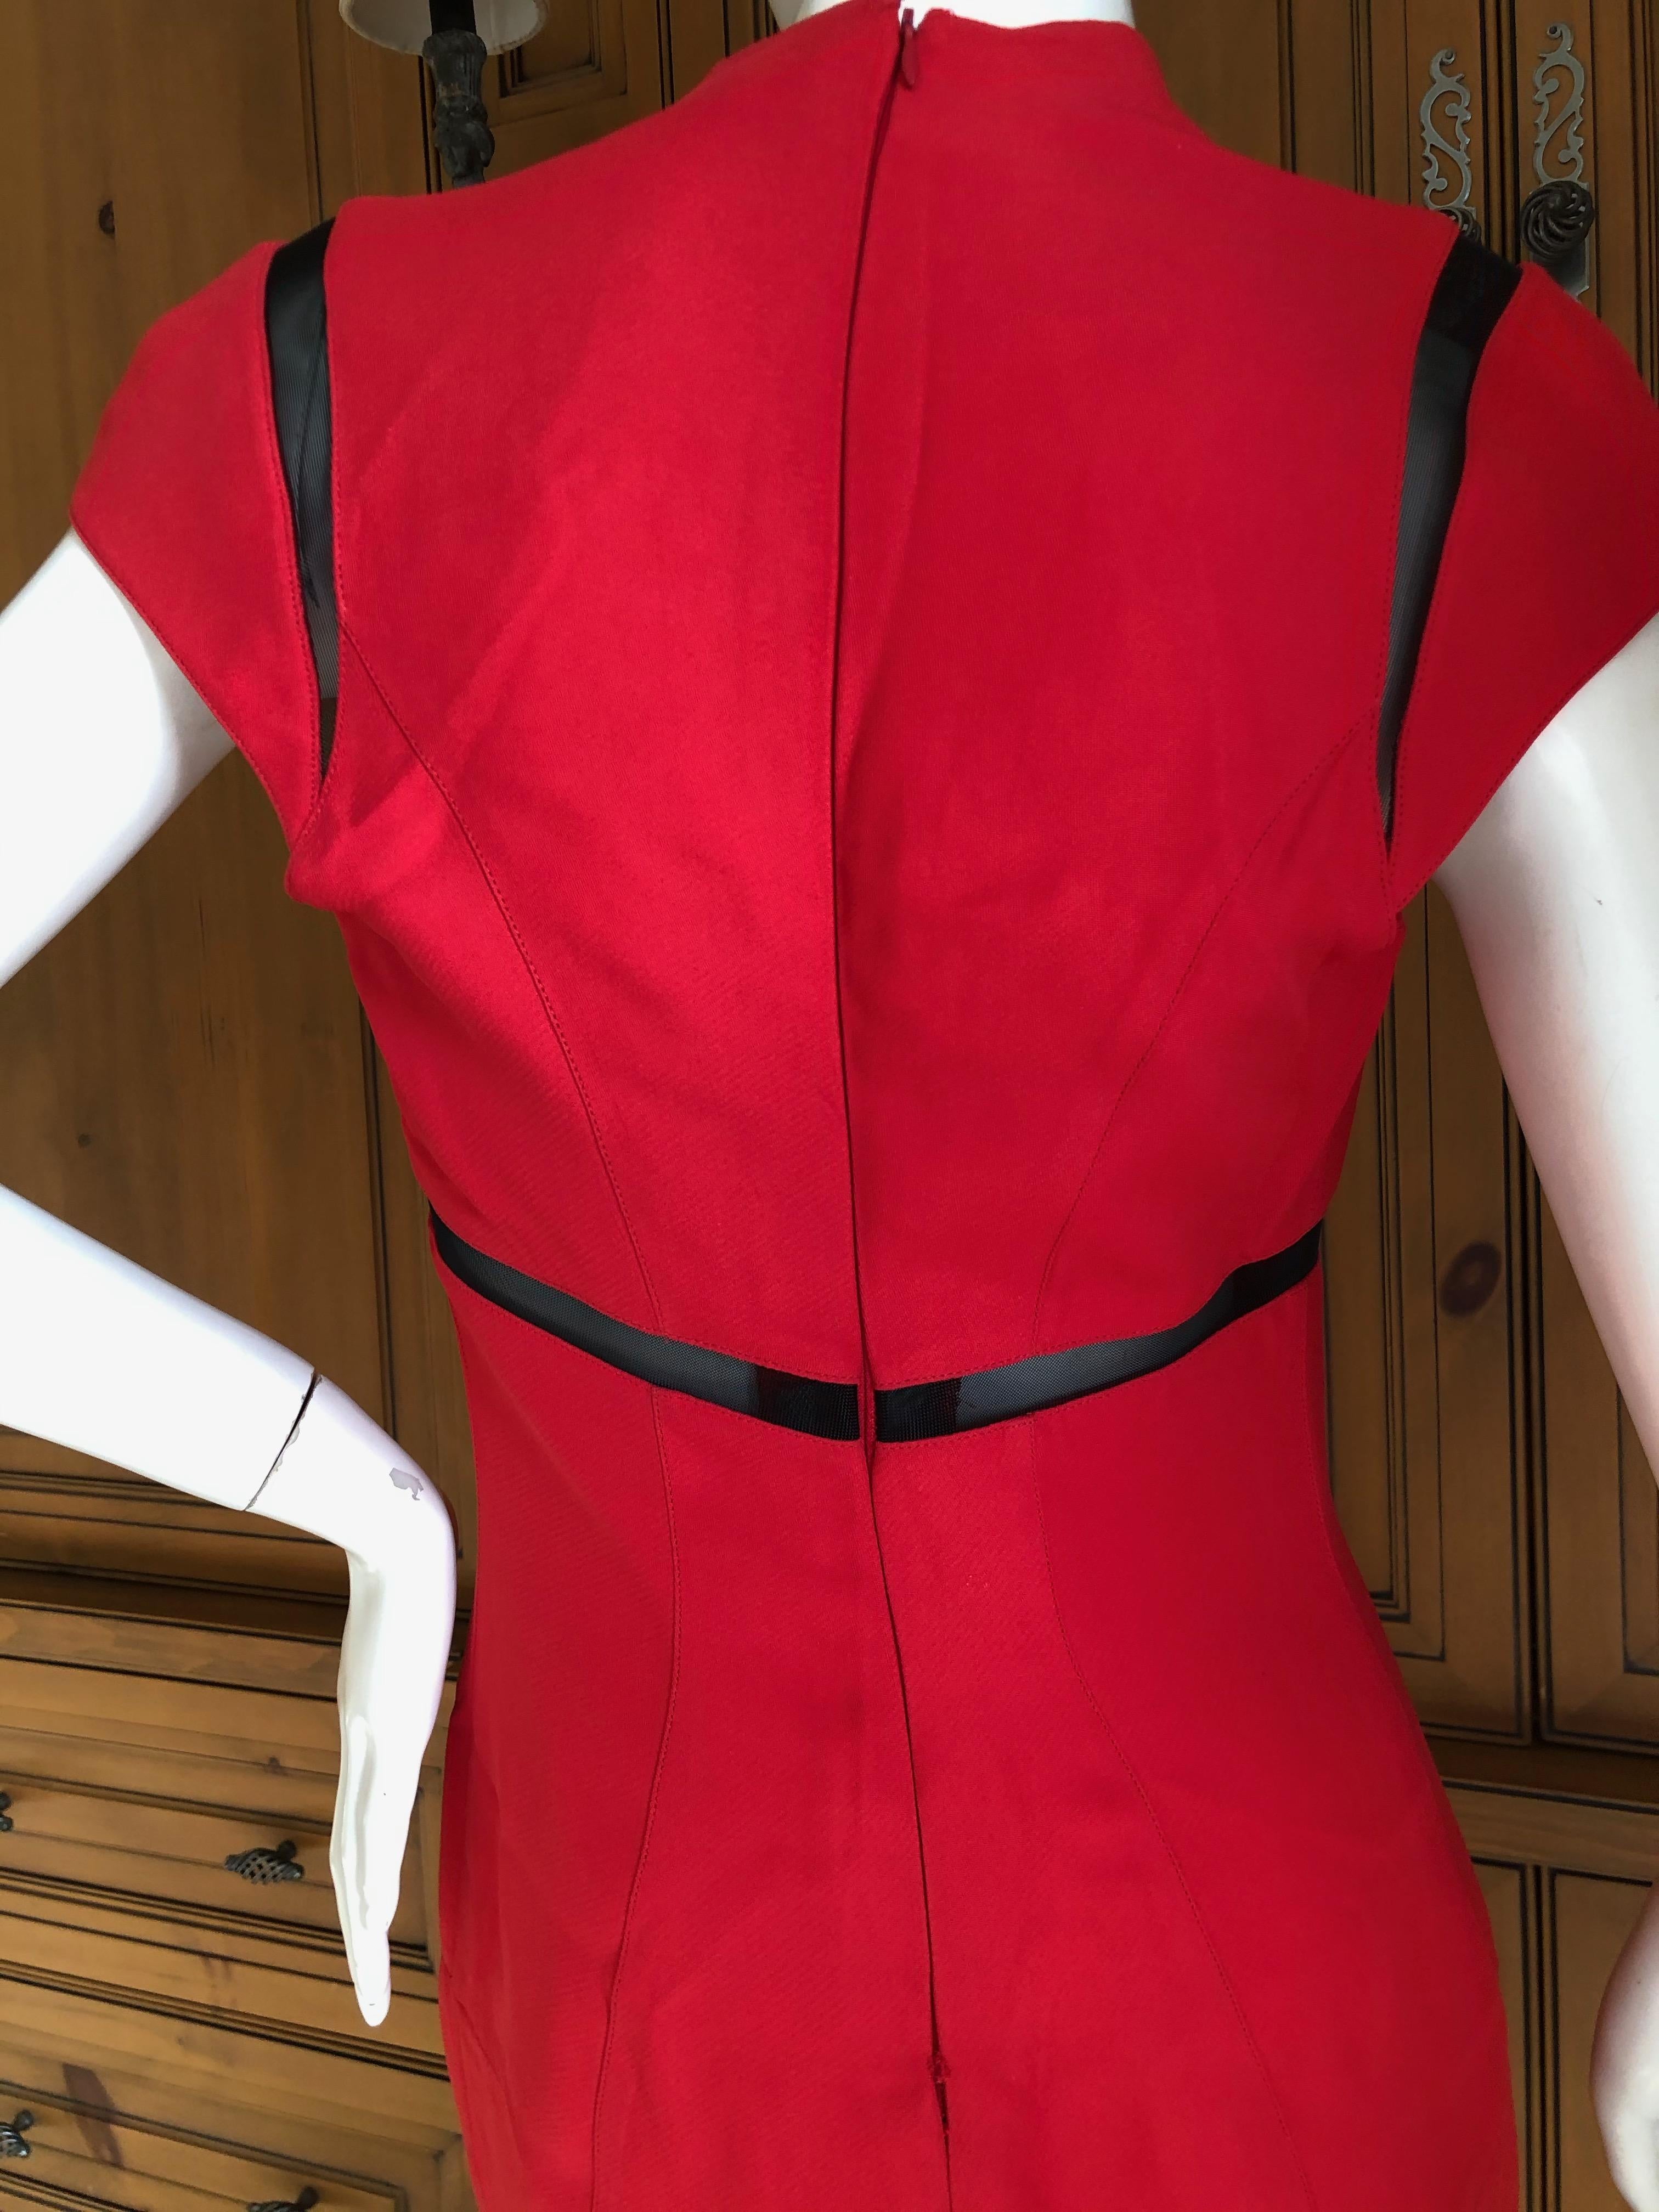 Thierry Mugler Vintage 1980's Red Cocktail Dress with Sheer Inserts For Sale 5